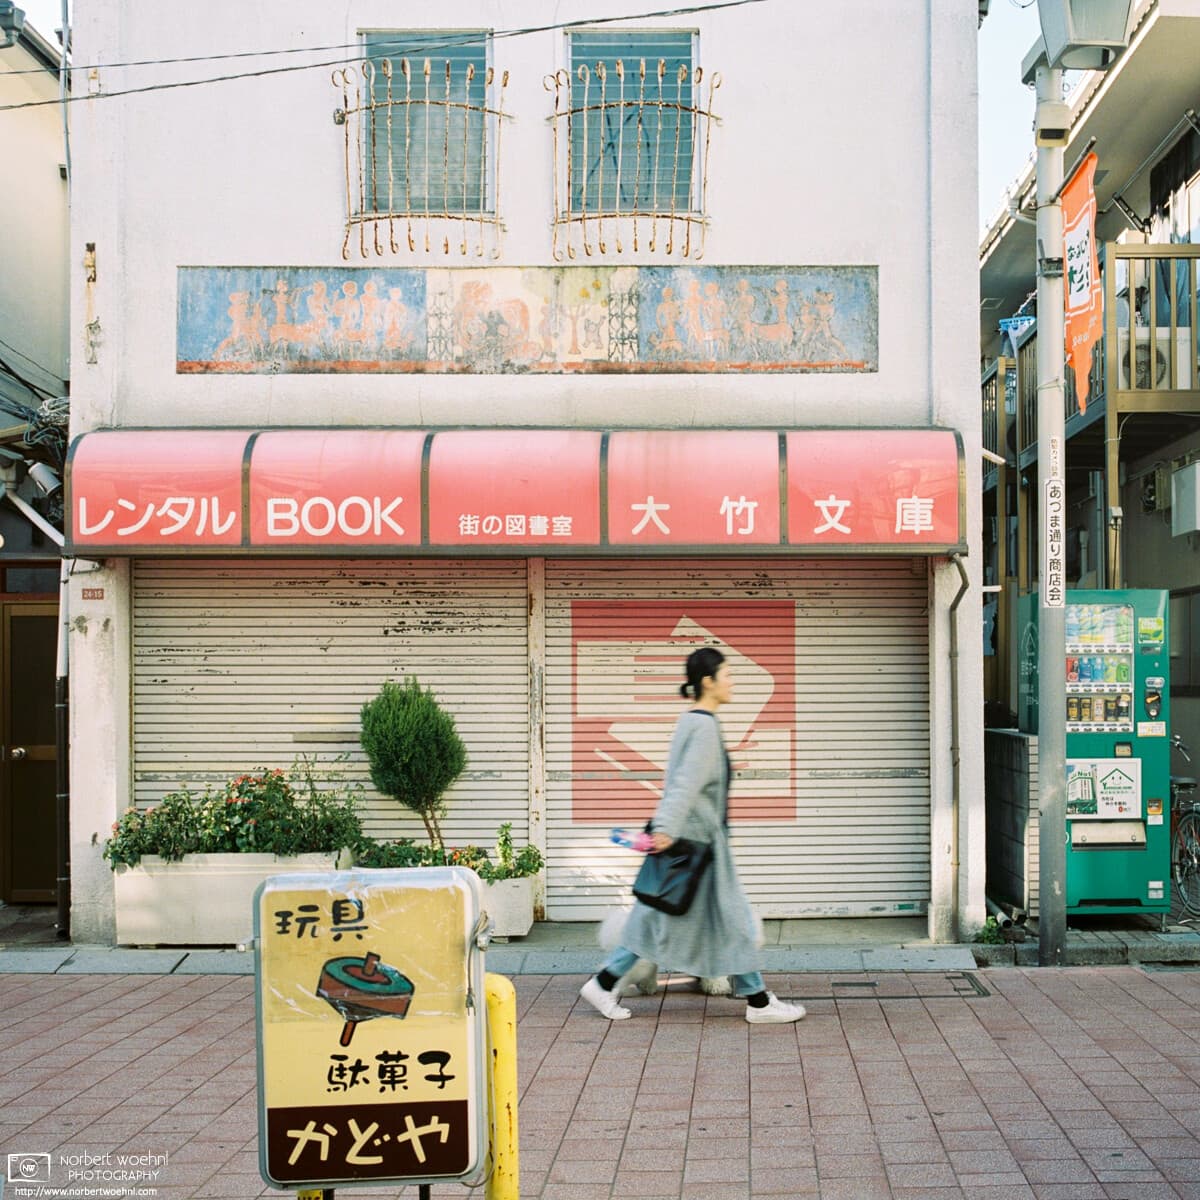 A woman walks past the slightly dated facade of a rental book store in Koenji, Tokyo, Japan.